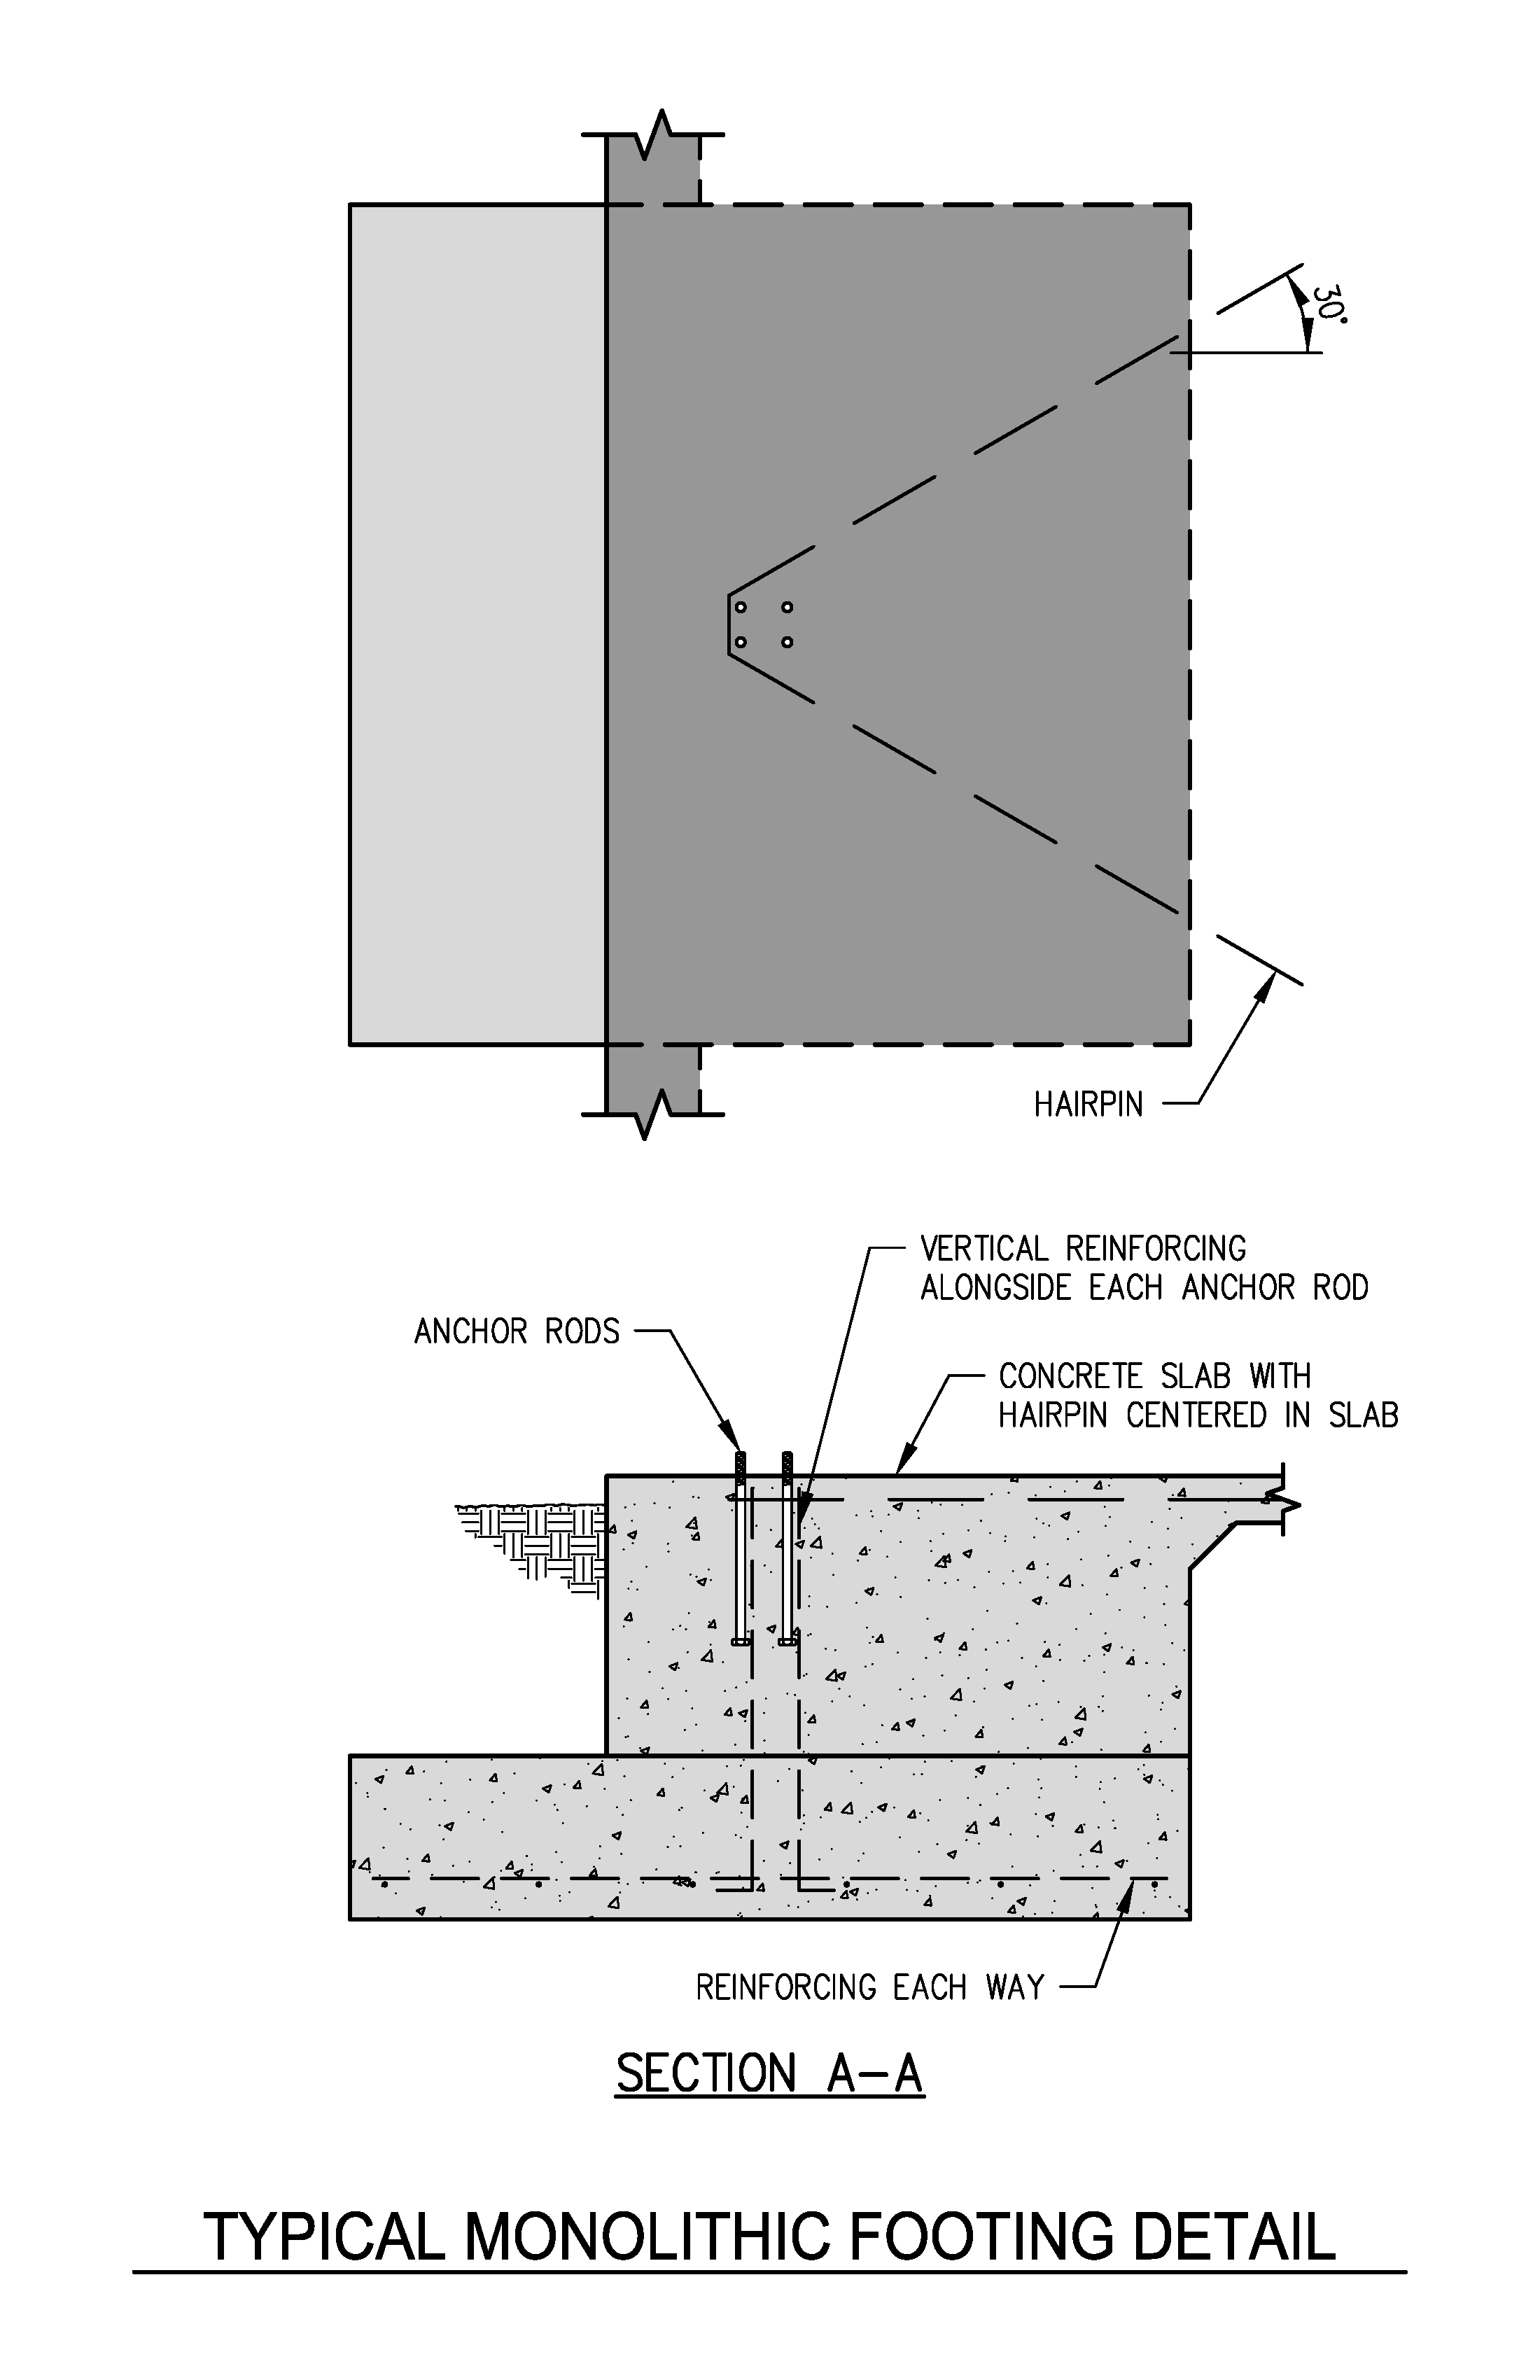 Typical Monolithic Footing Detail